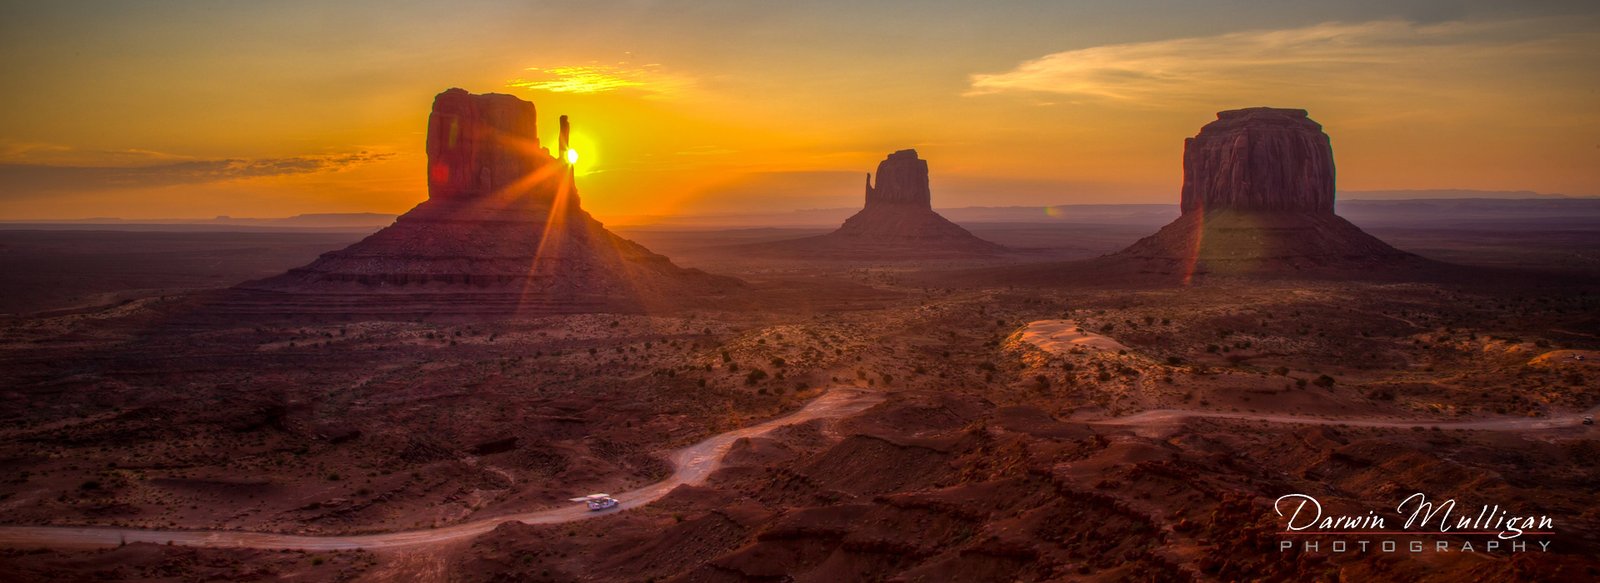 Classic view of Monument Valley